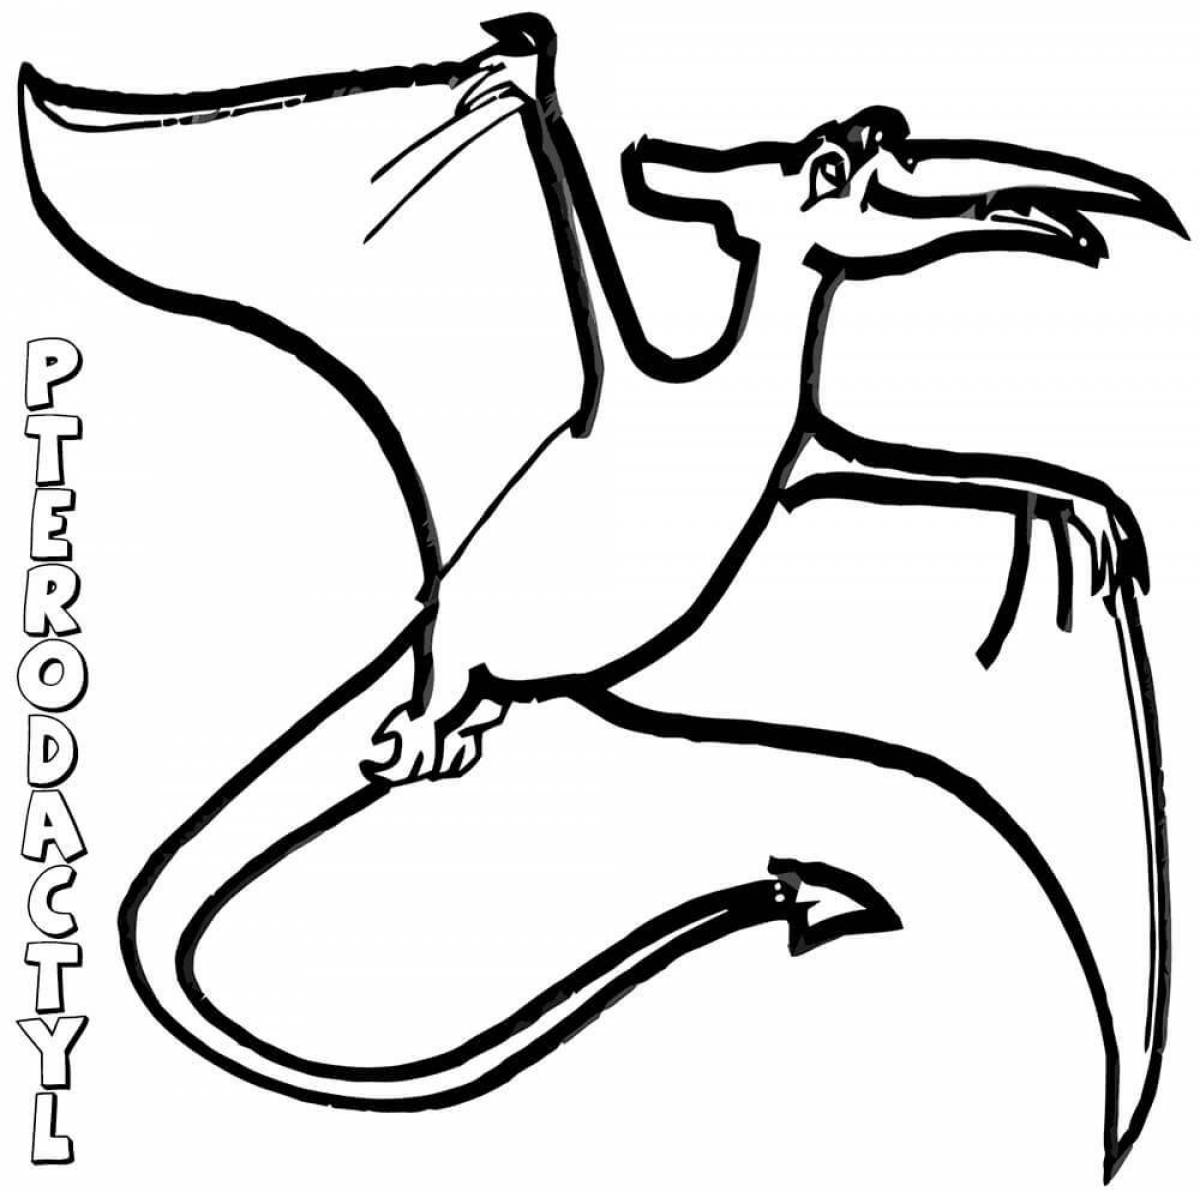 Gorgeous pterodactyl coloring book